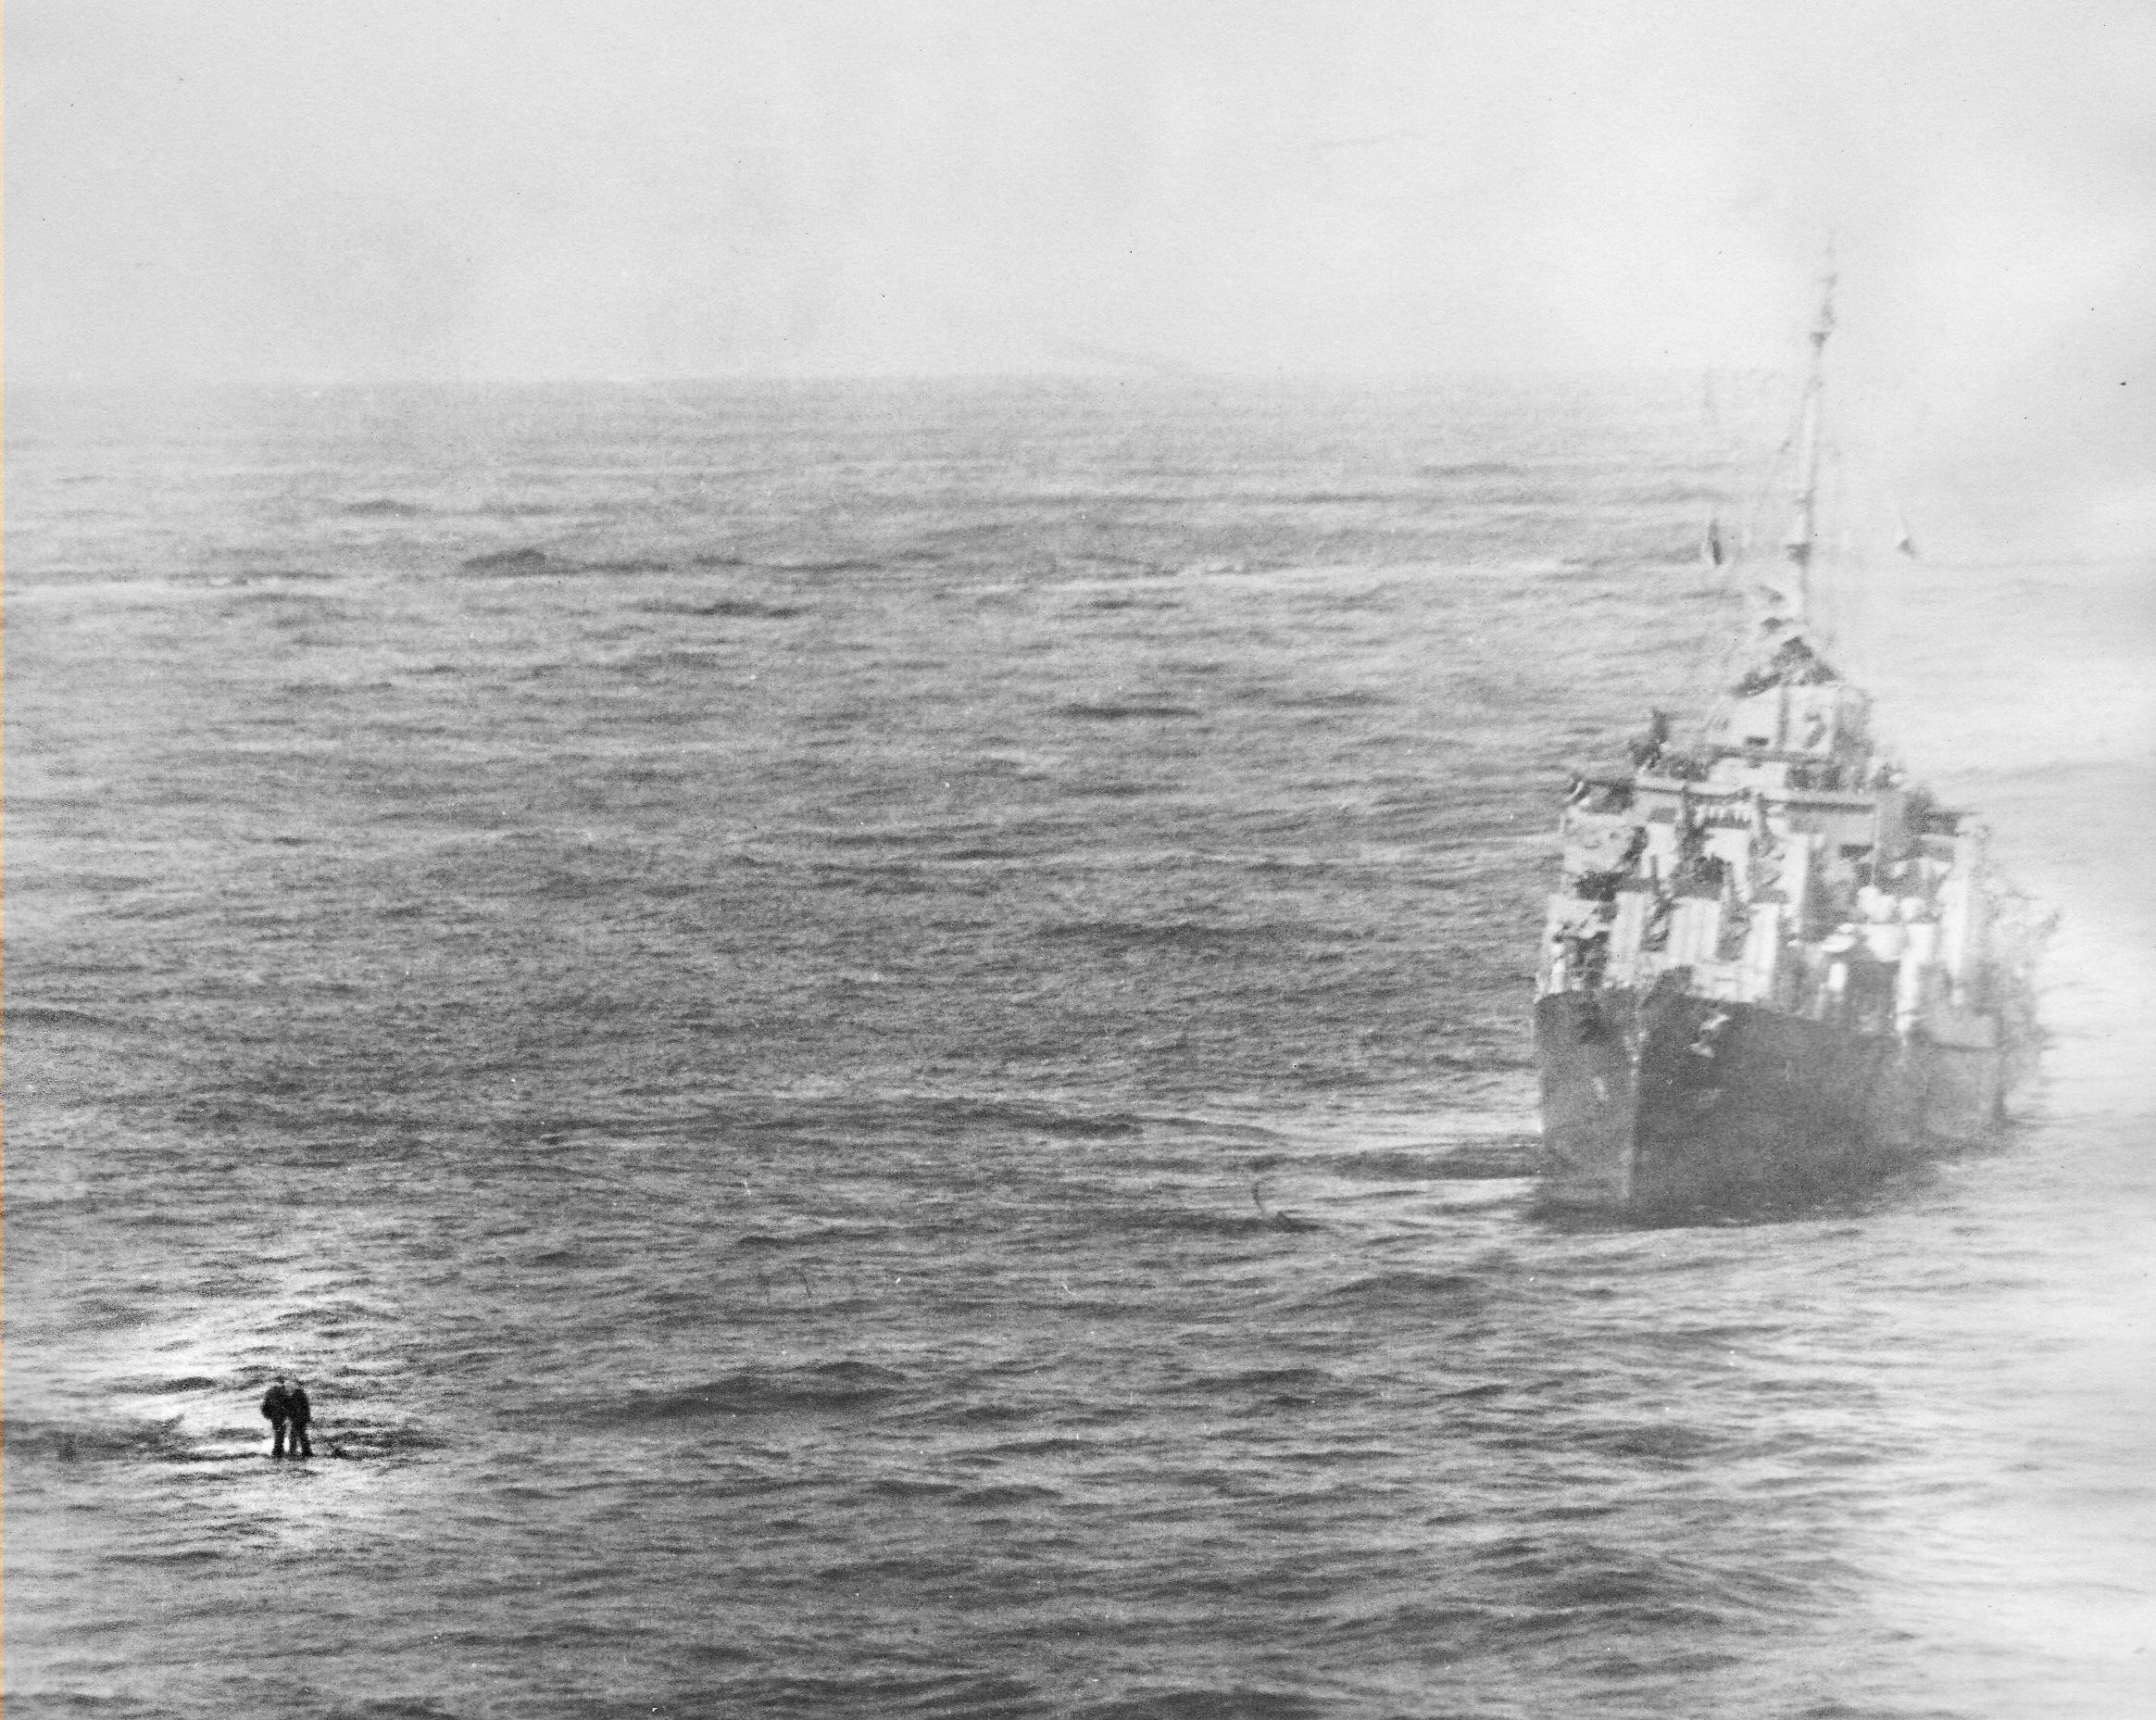 Two sailors from USS Enterprise stand on a section of the forward elevator awaiting rescue from USS Waldron after being blown into the water by the same explosion that sent the elevator high into the air, 14 May 1945.